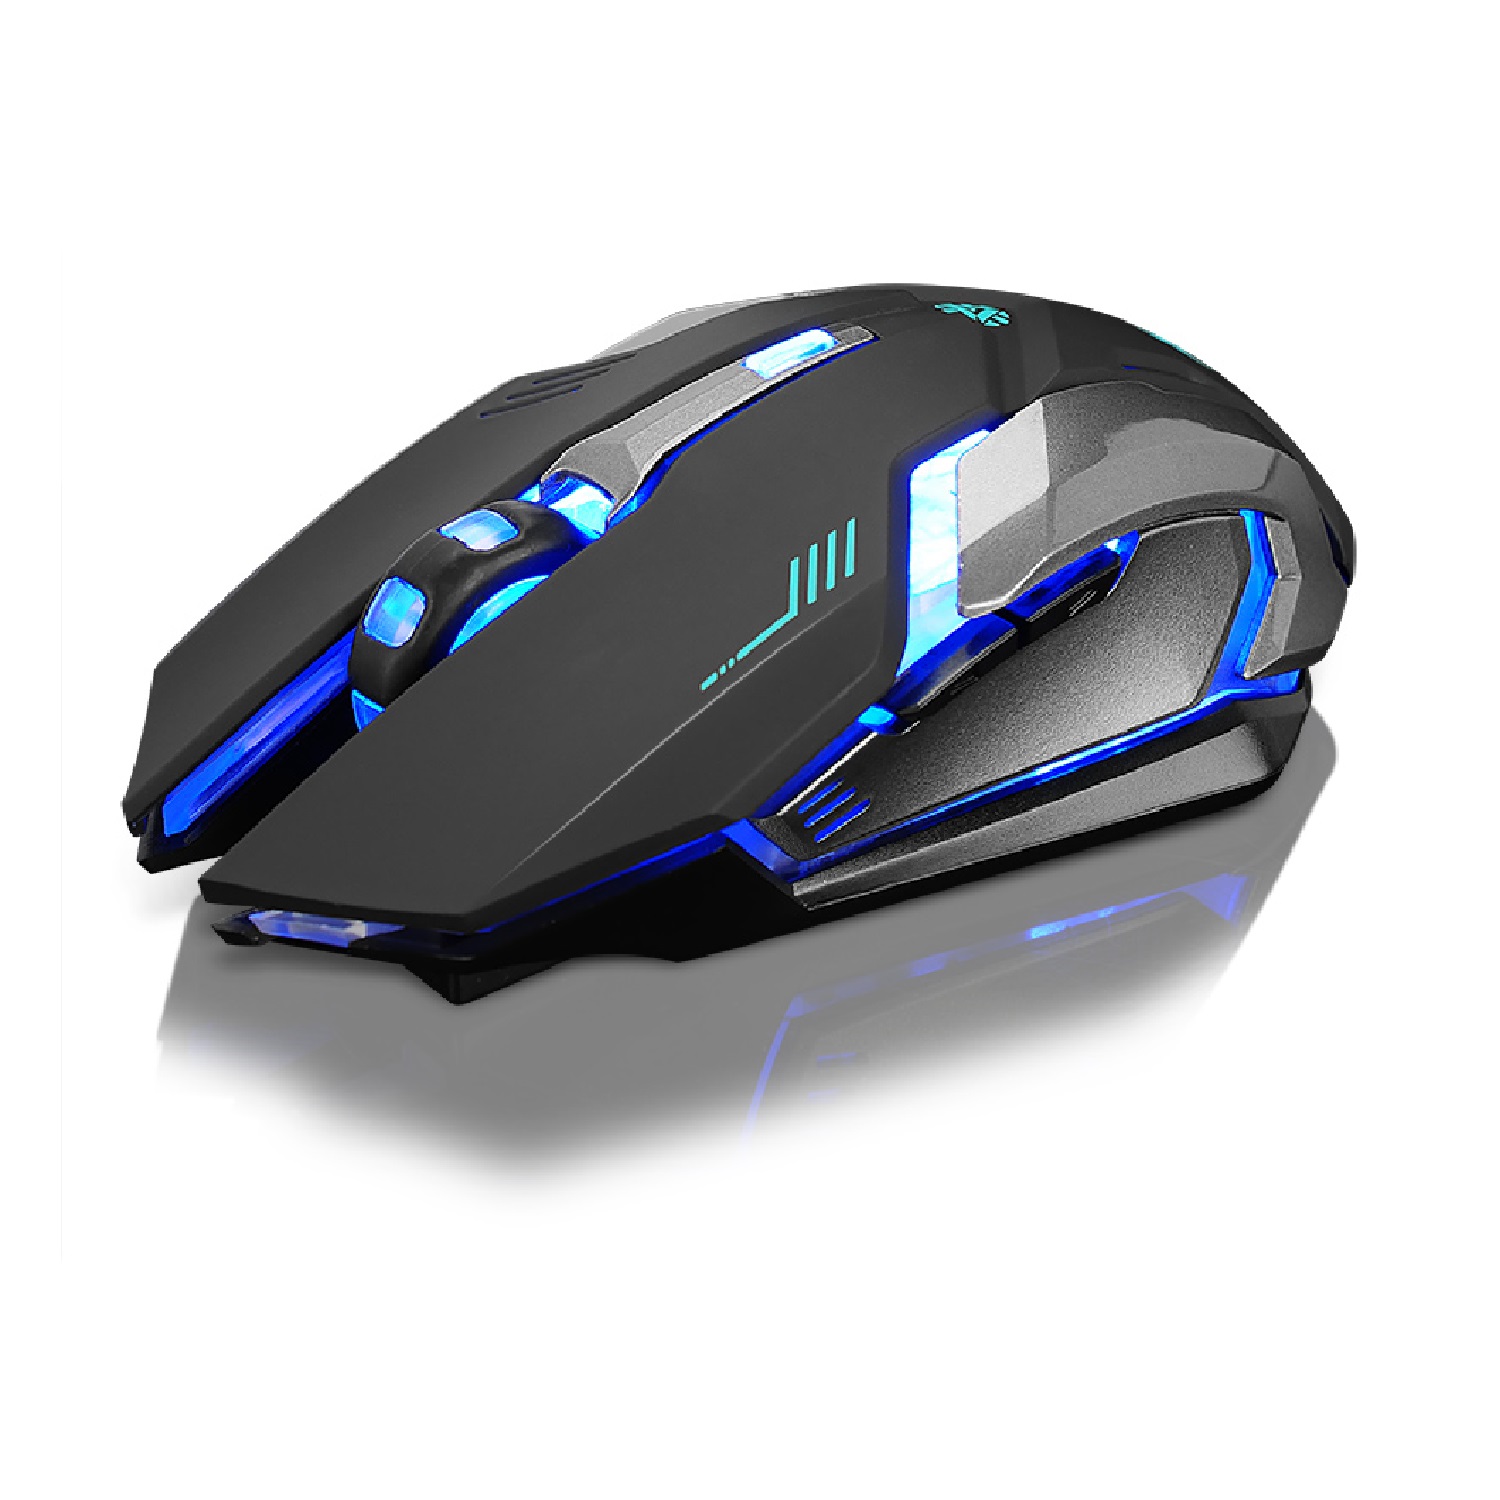 X7 Wireless Gaming Mouse Silent Click LED Optical Computer Mouse with USB Receiver 3 Adjustable DPI 